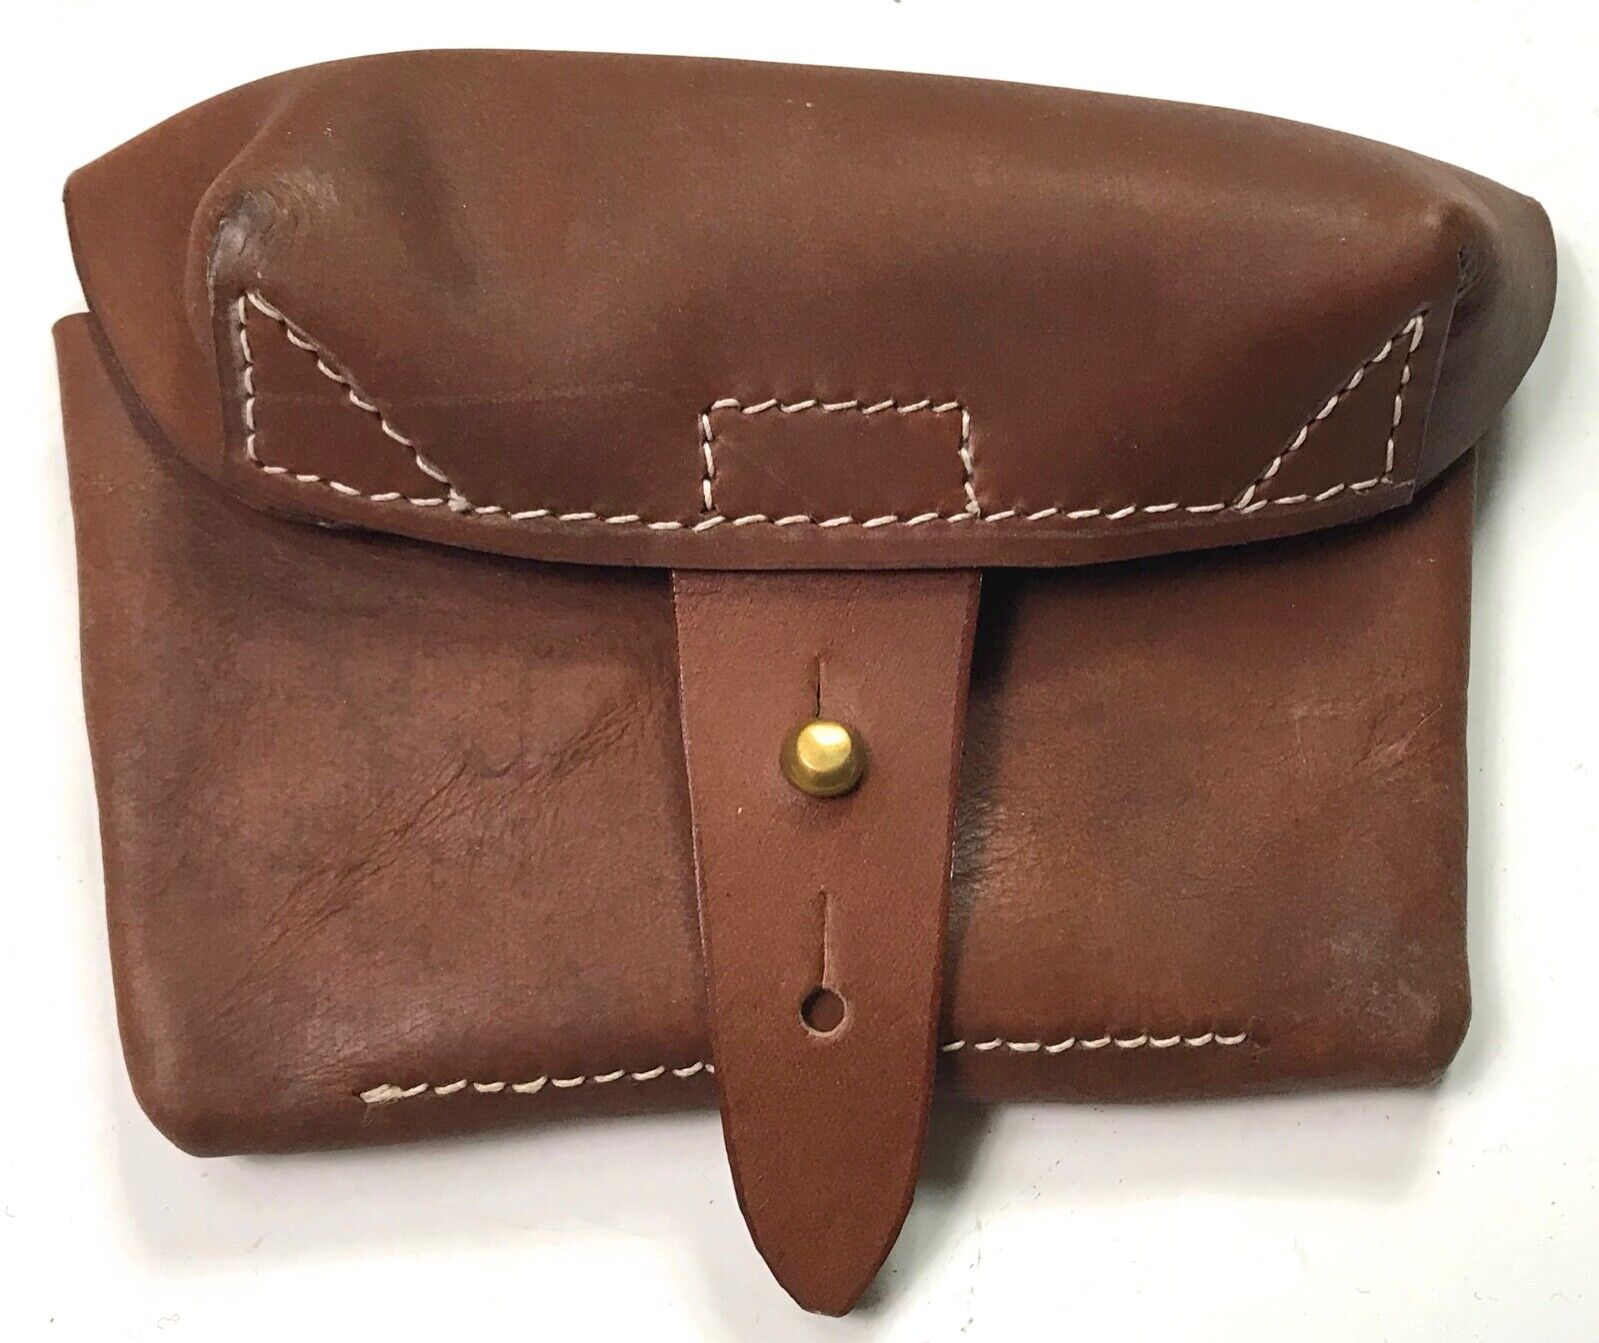 WWII SOVIET RUSSIA SVT-40 RIFLE LEATHER AMMO POUCH